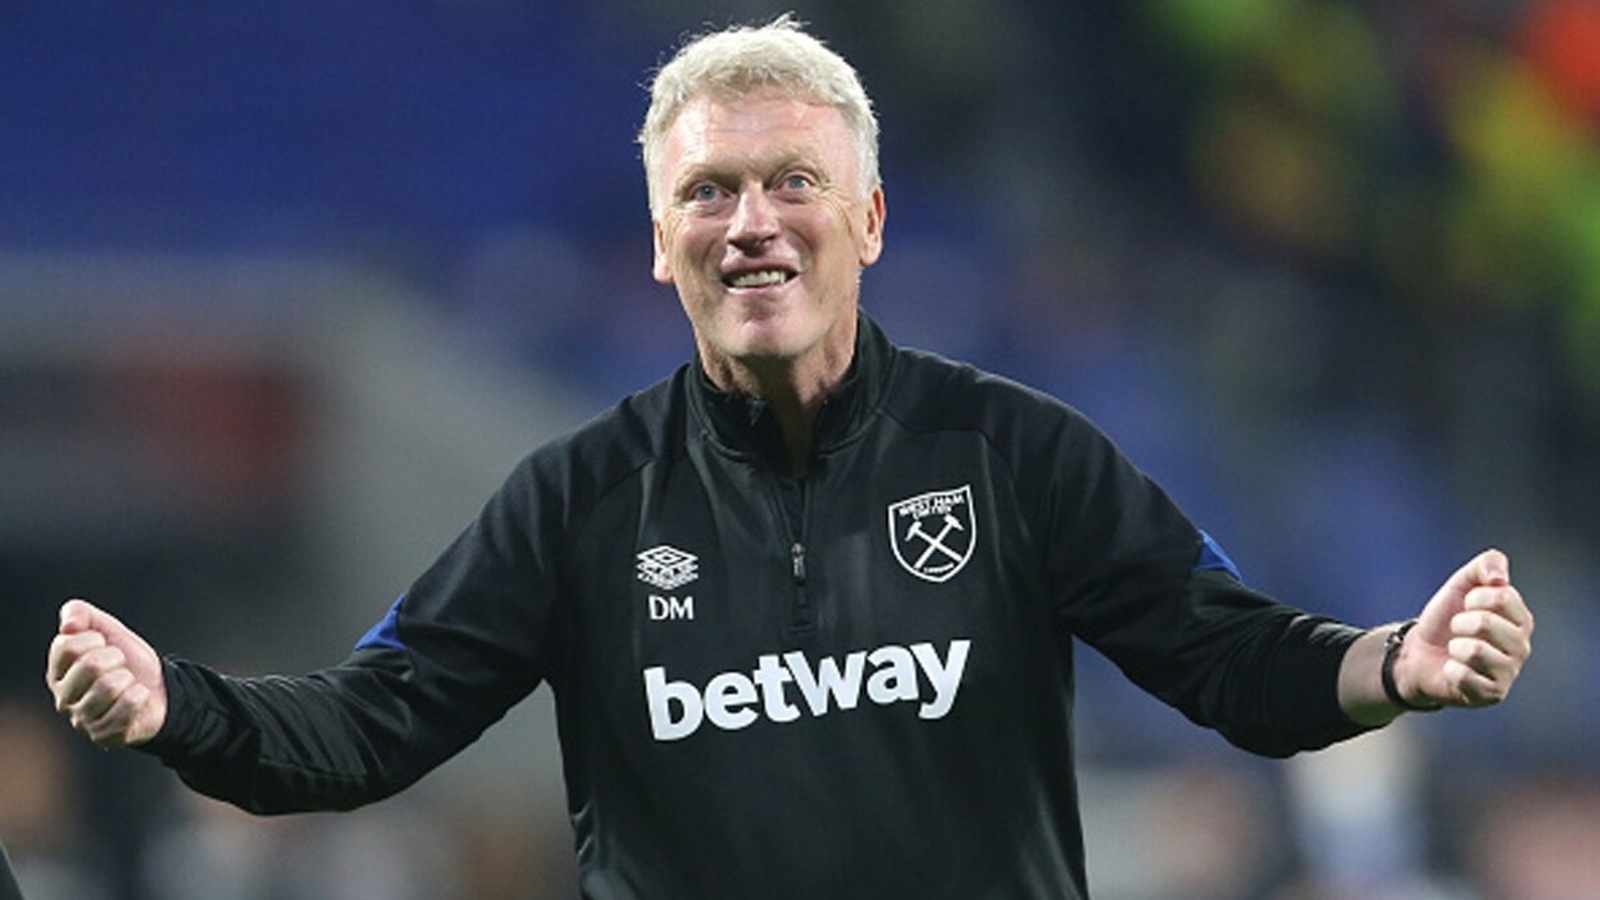 Can David Moyes help West Ham take the next step?